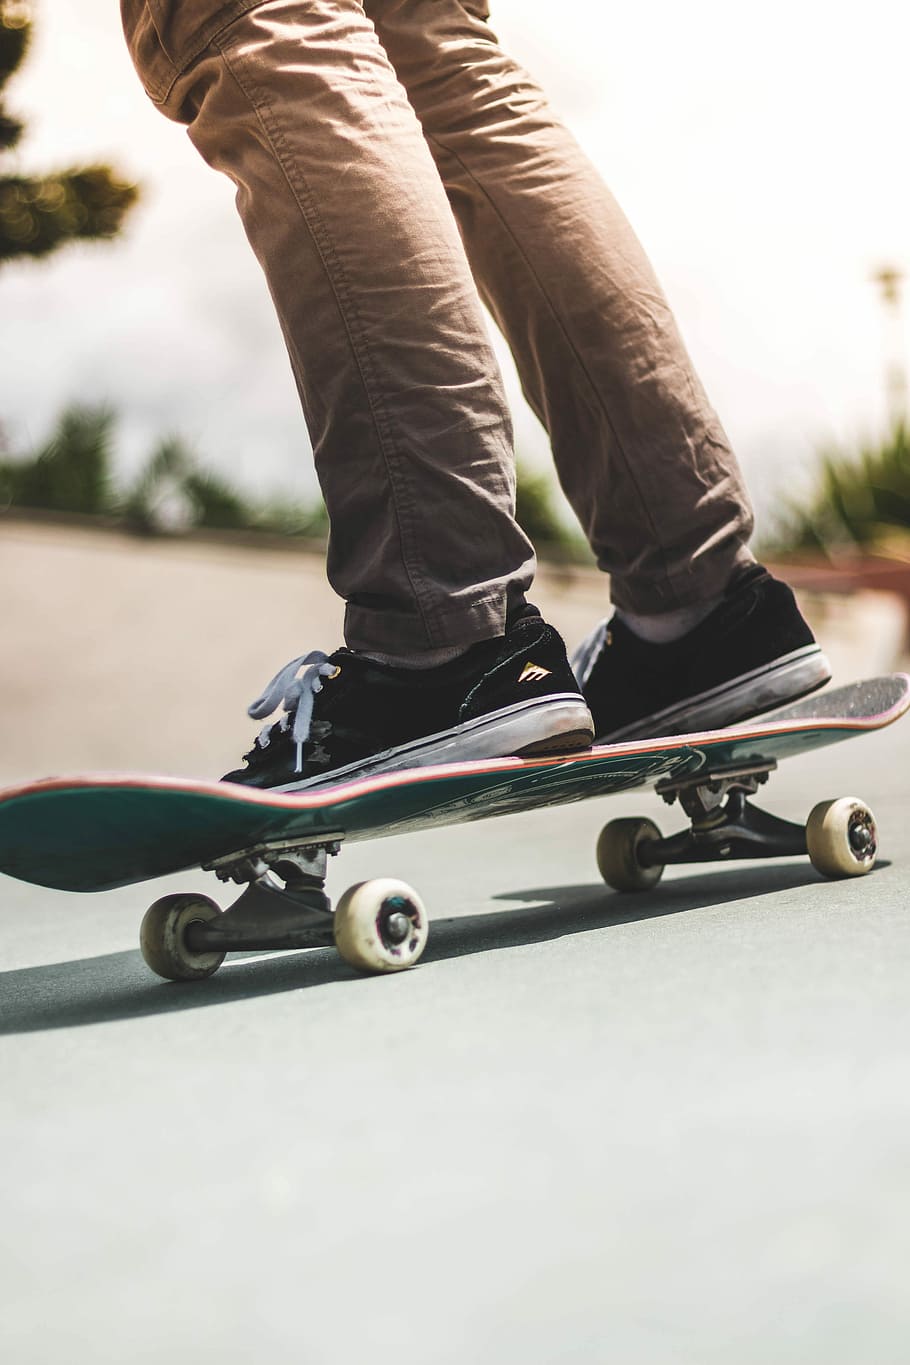 person wearing pair of black-and-white Easton low-top sneakers and brown pants while riding on brown and black skateboard on gray concrete road during daytime